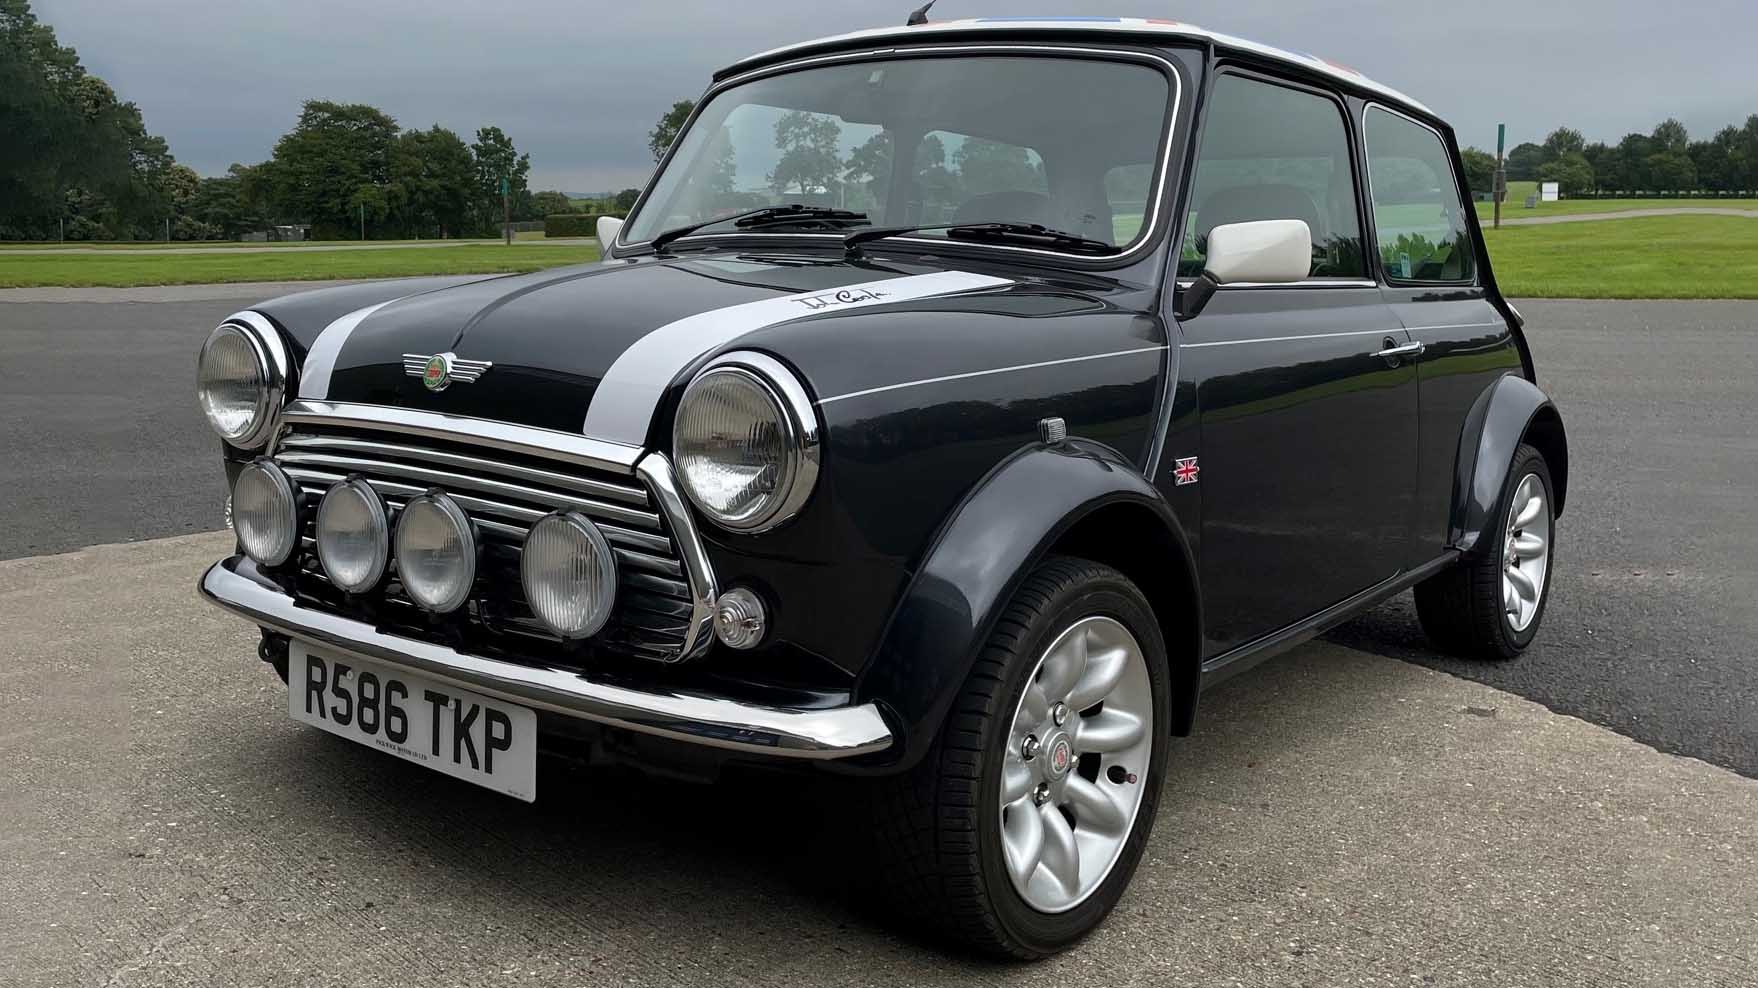 Mini Brooklands wedding car for hire in Maidstone, Kent